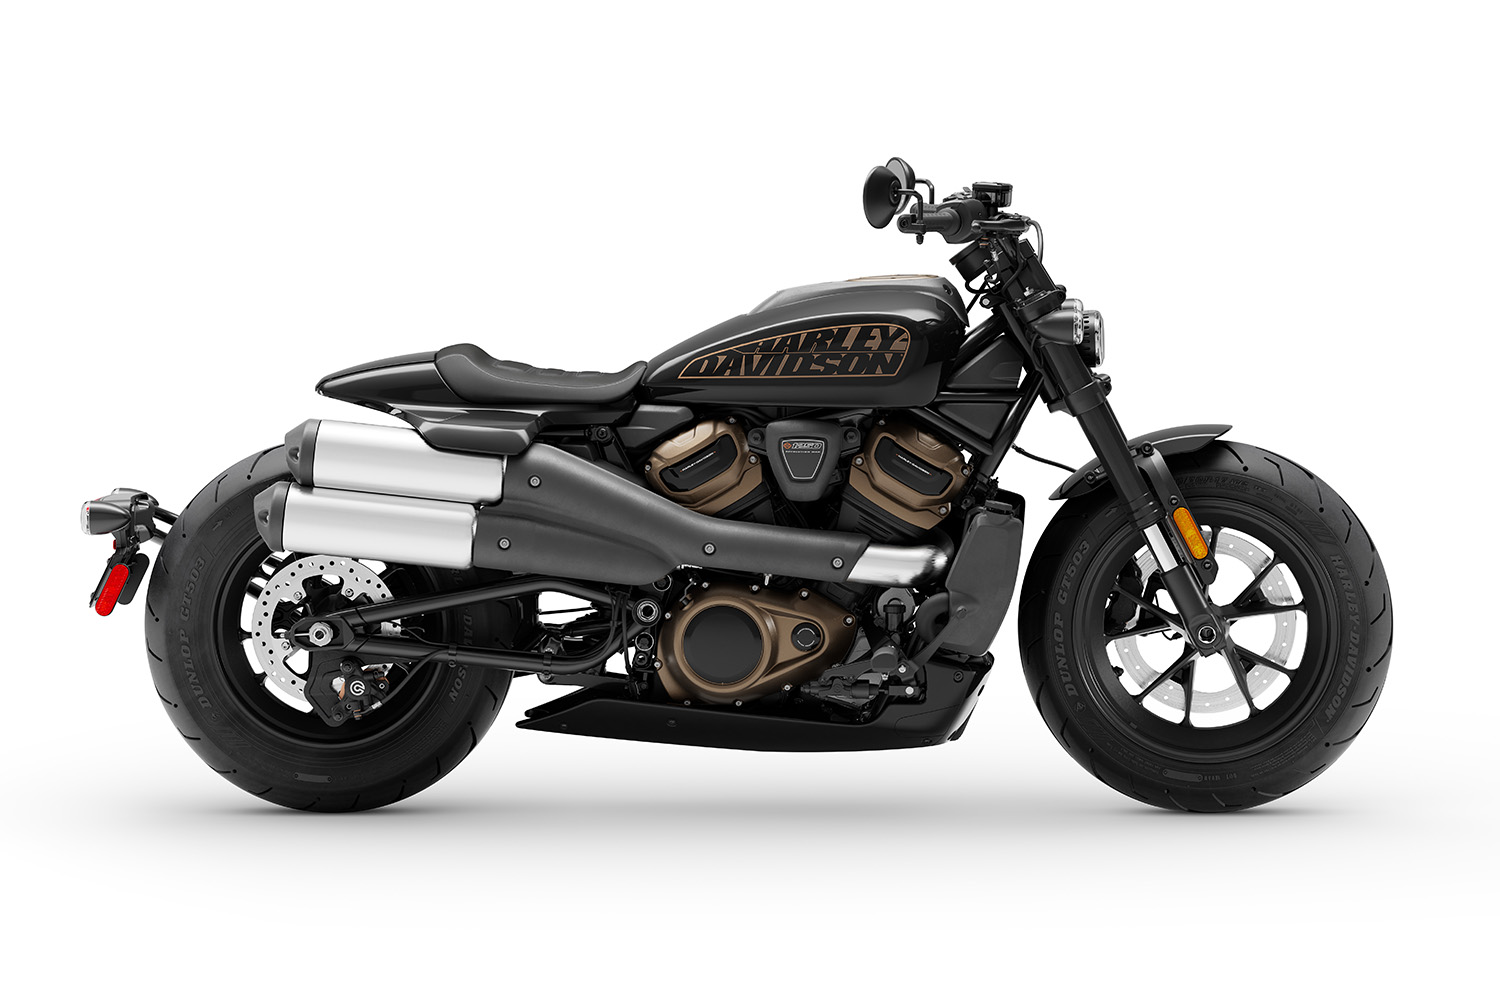 2021 Harley Davidson Sportster S First Look Review Autobala